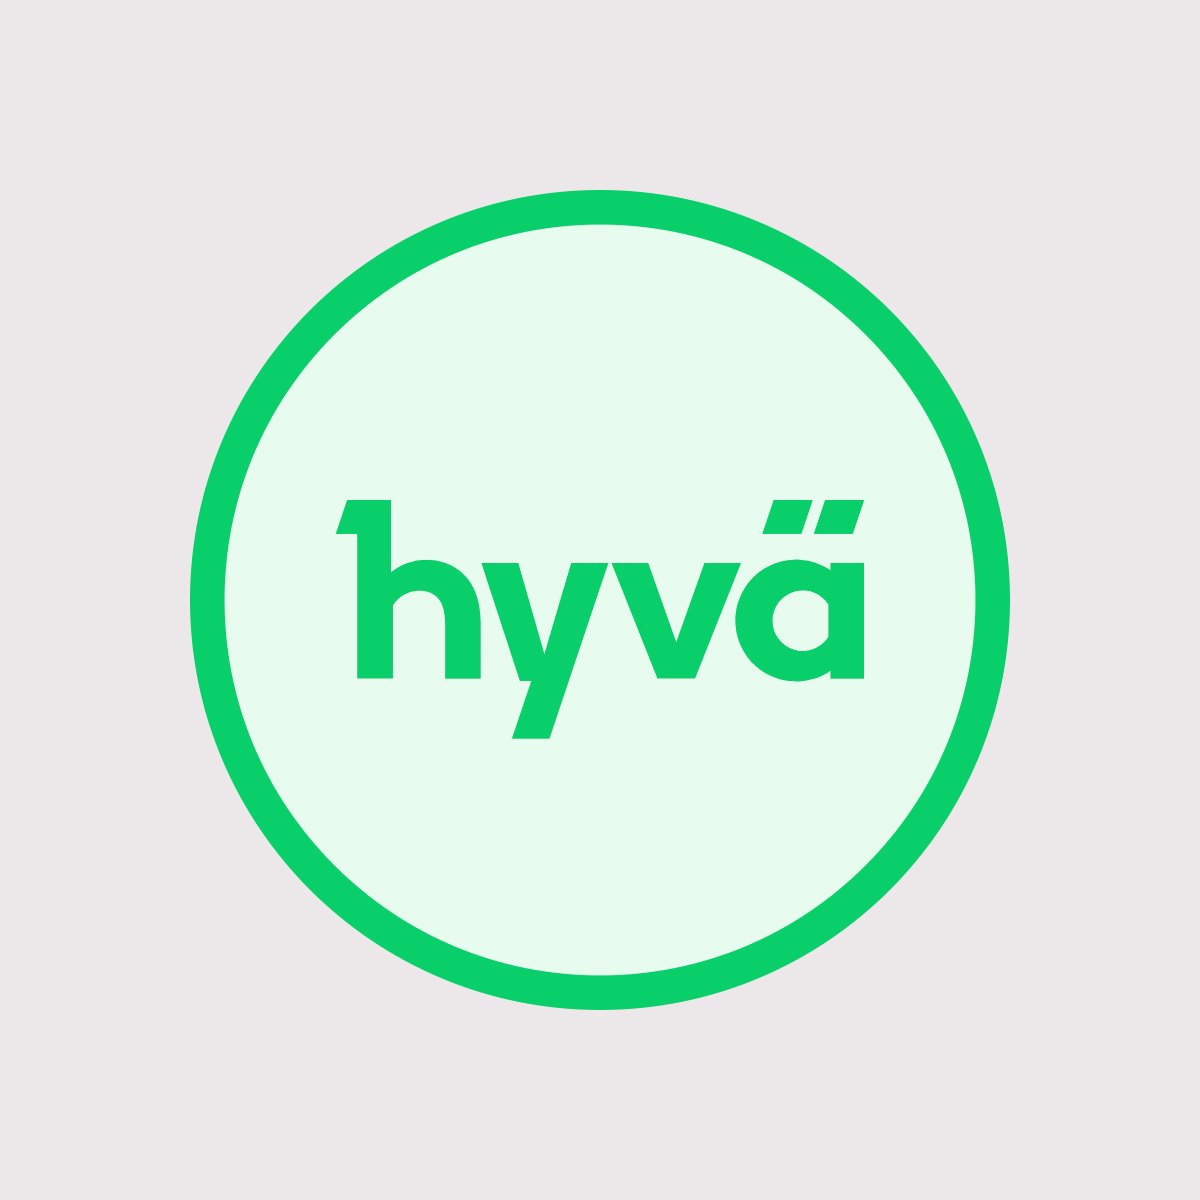 Is Hyvä a guarantee for passing Core Web Vitals?